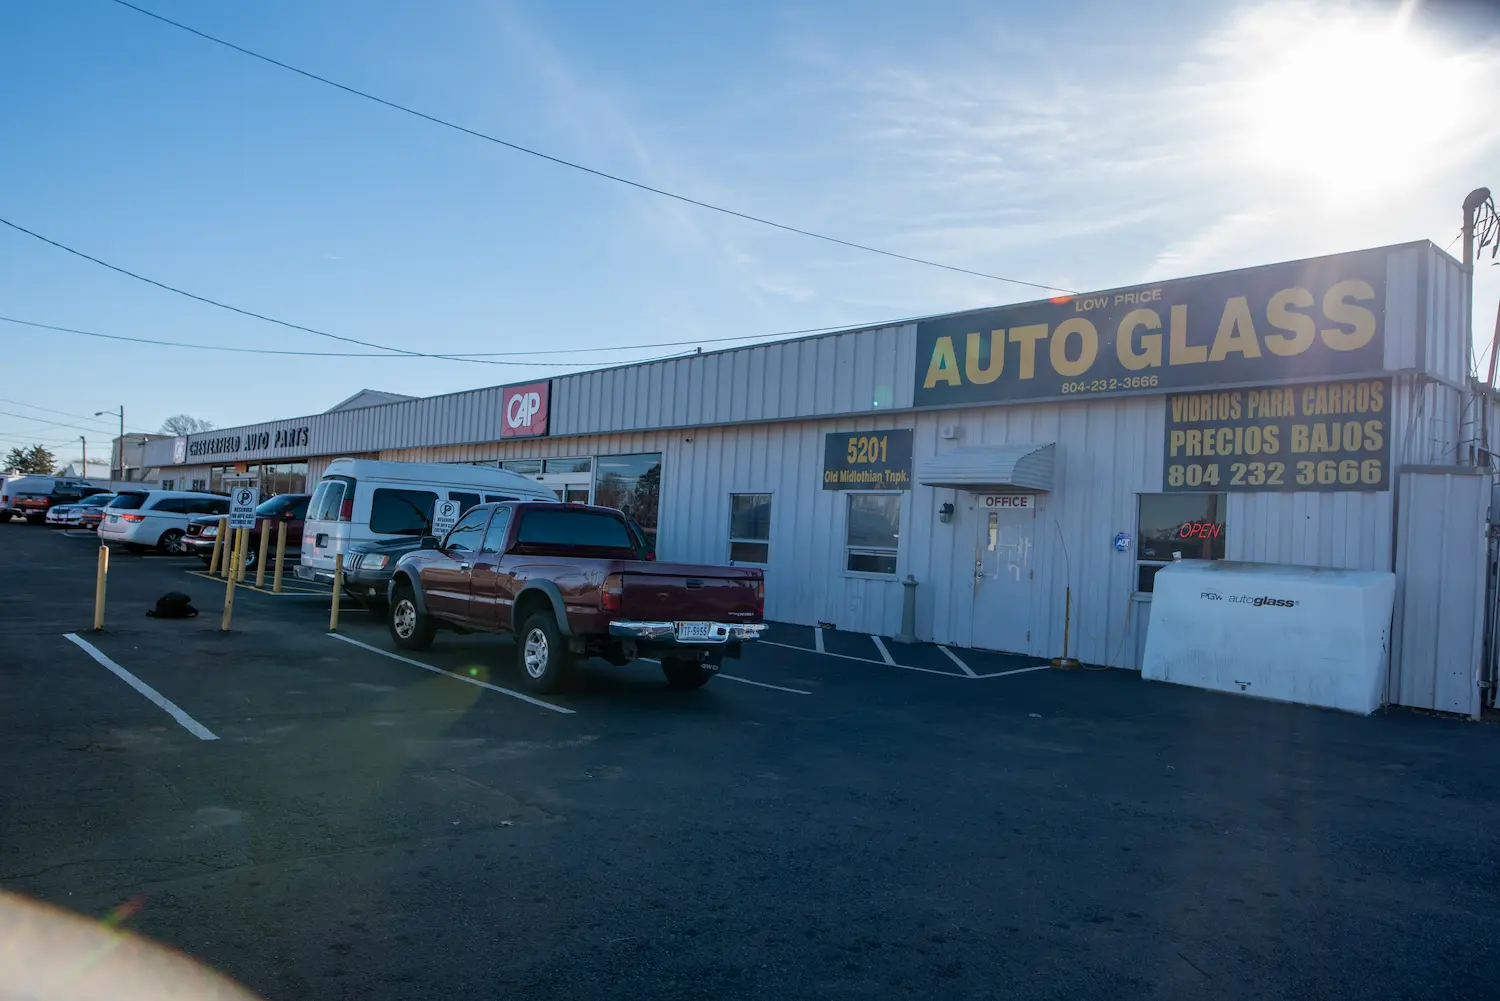 Corner of building showing Low Price Auto Glass sign